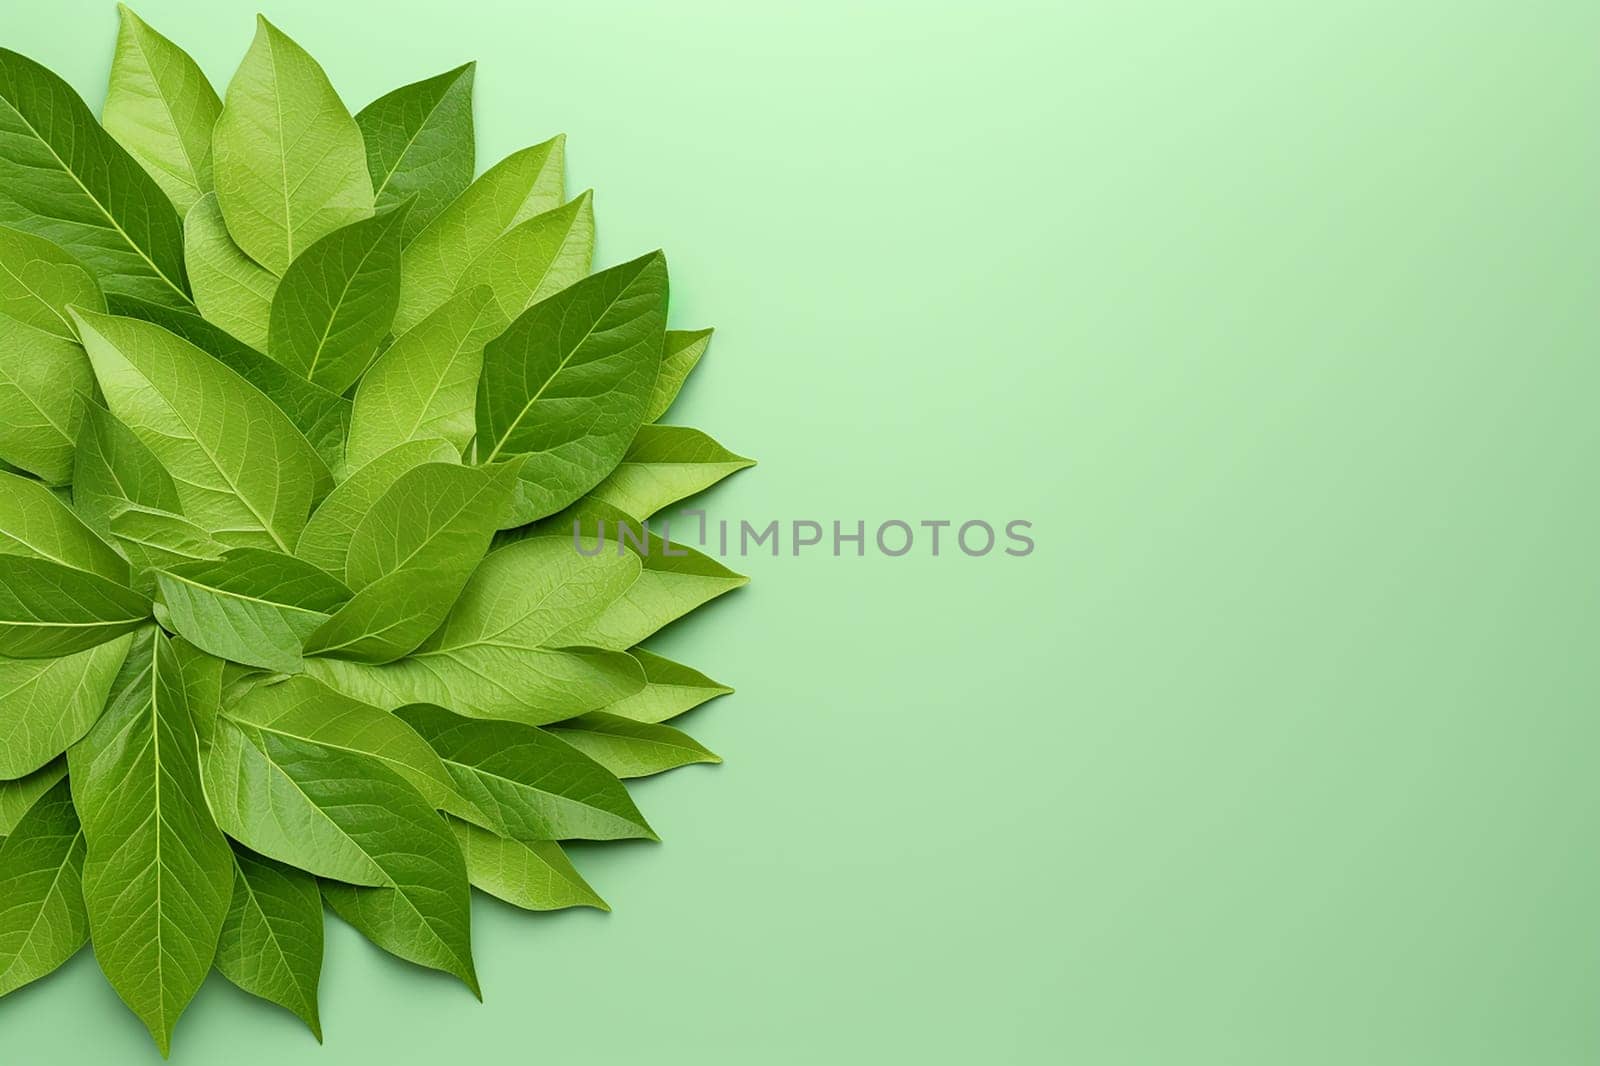 Multiple overlapping green leaves on a soft green background. by Hype2art